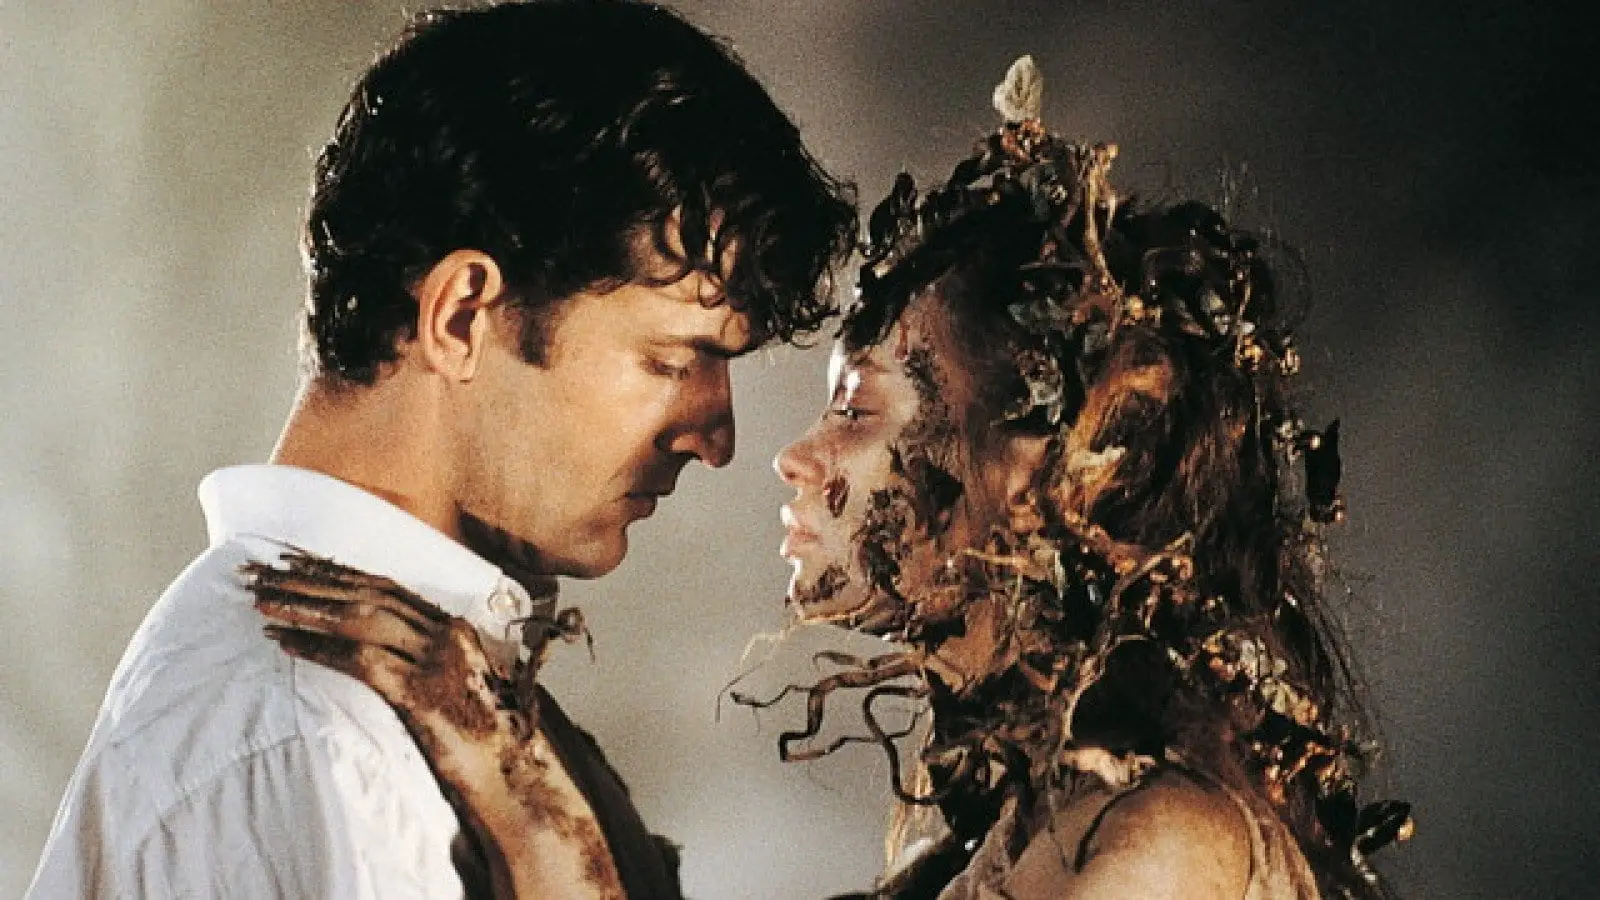 Cemetery Man (Rupert Everett) makes love to the reanimated corpse of a woman who has recently come back from the dead.